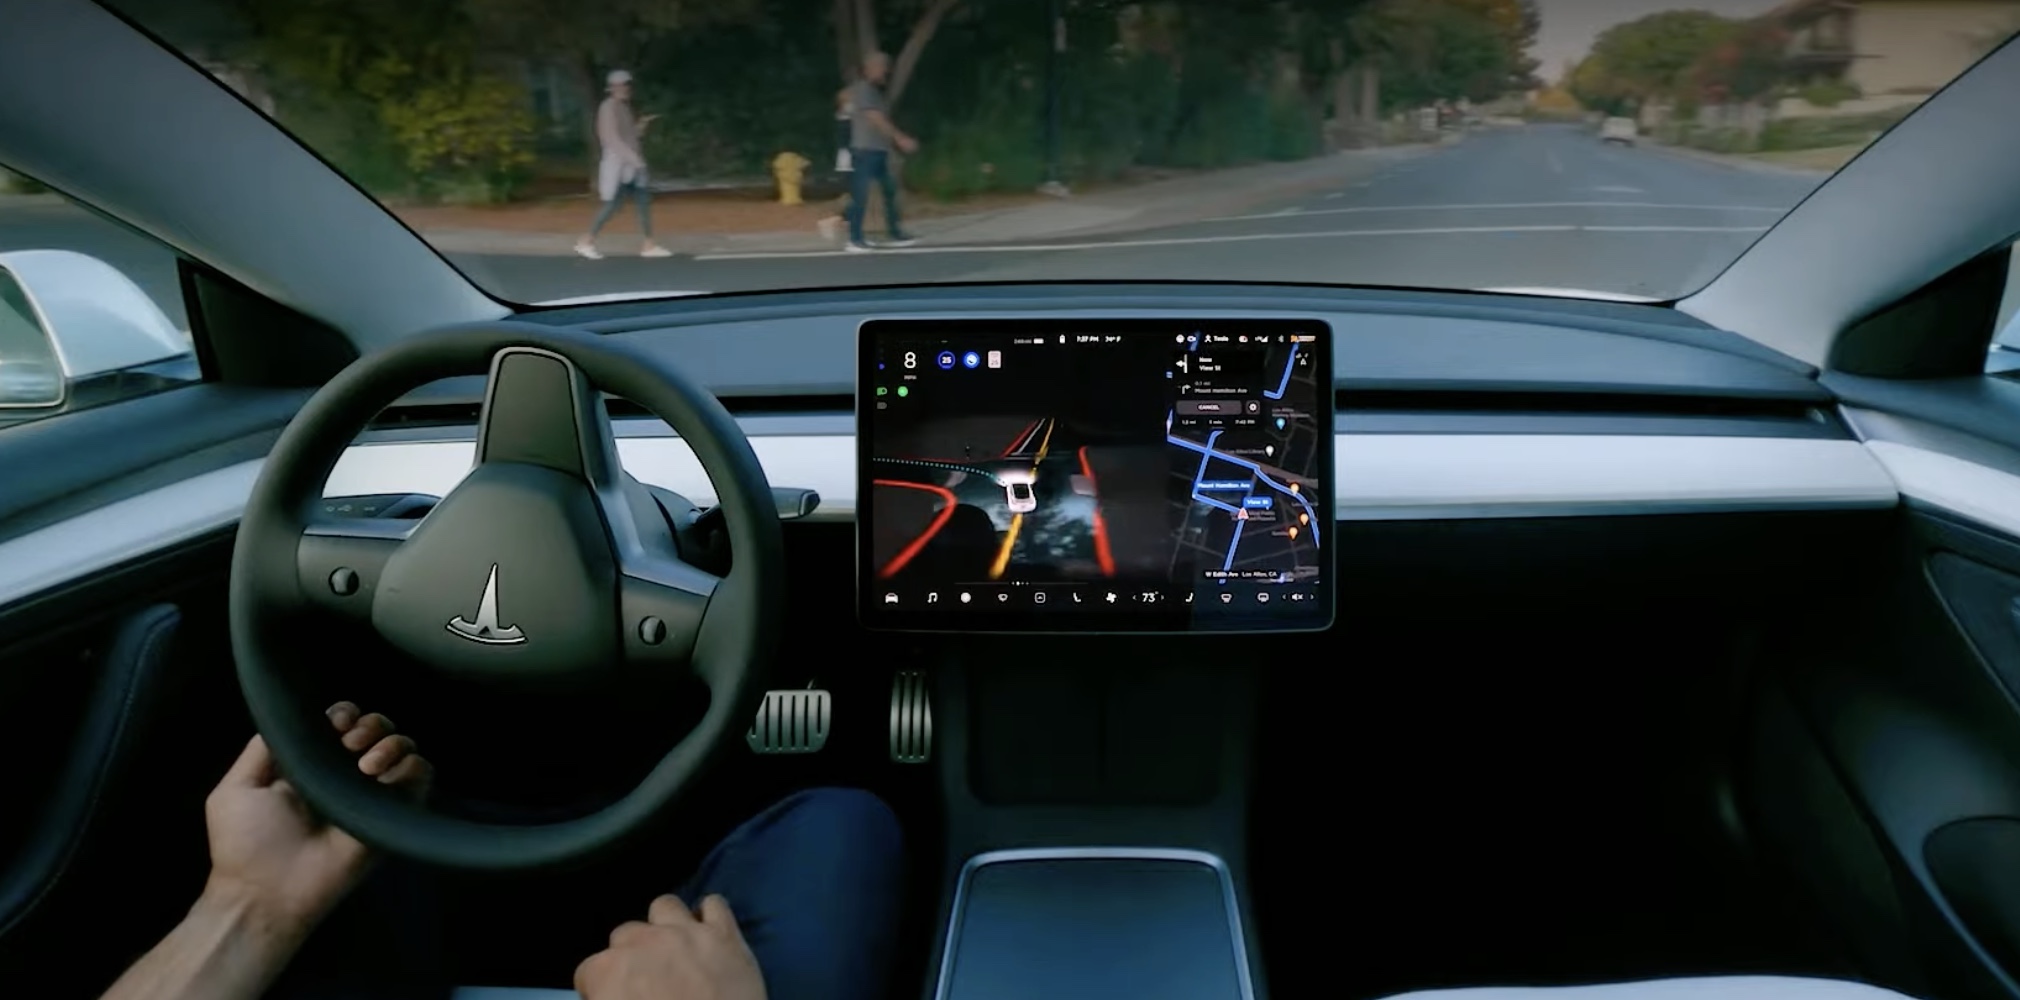 Elon Musk says Tesla will be ready with Full Self Driving Suite by 2022